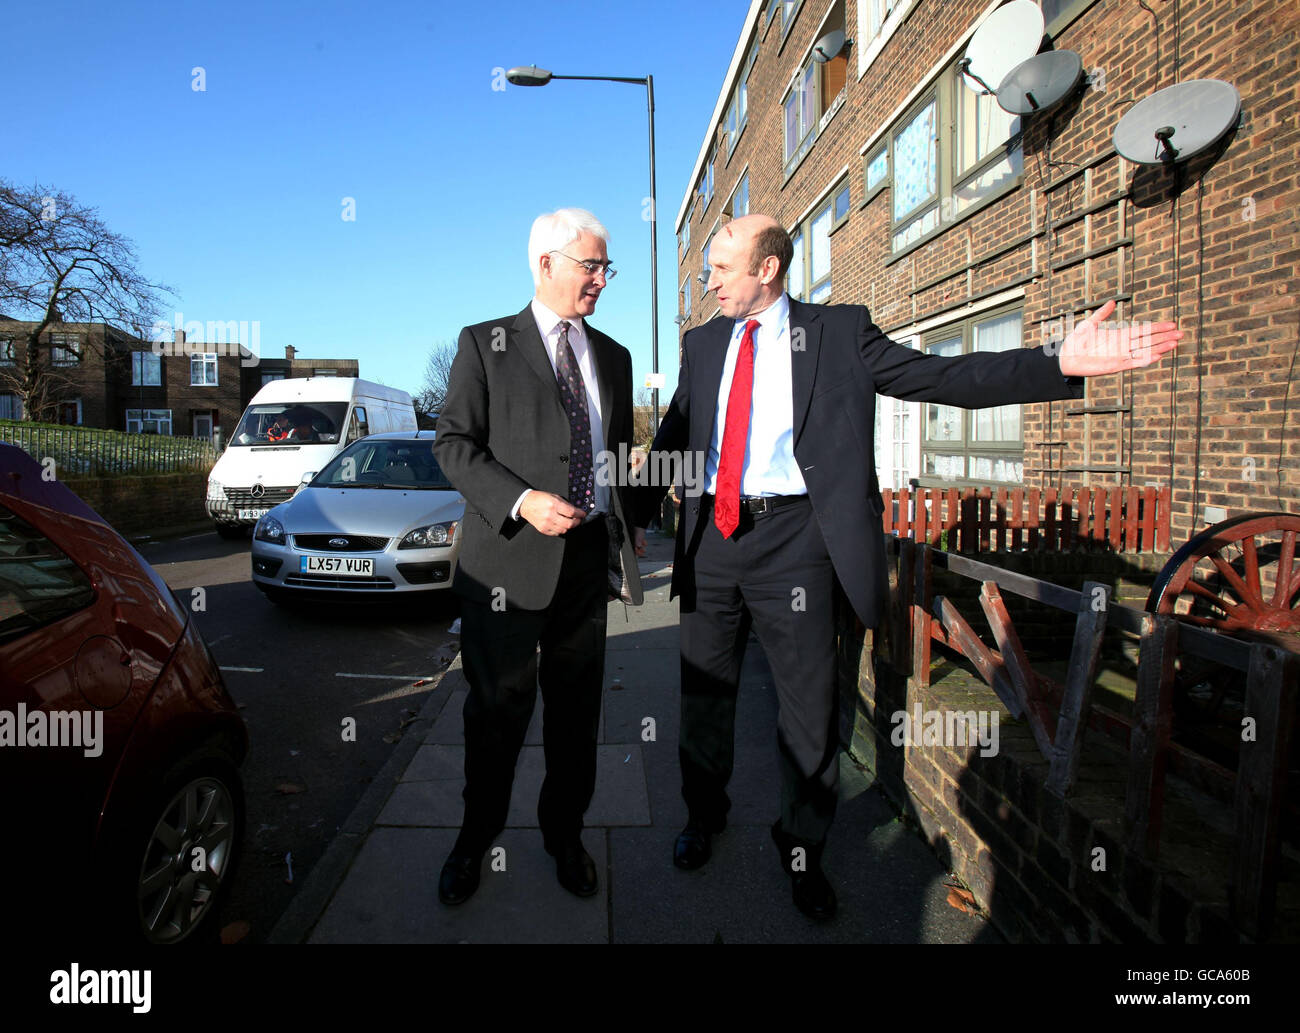 Chancellor Alistair Darling and Housing Minister John Healey (right) visit the home of Paul Rice and Margaret MacMann, who were the first in London to benefit from the mortgage rescue scheme, in Plumstead, London. Stock Photo